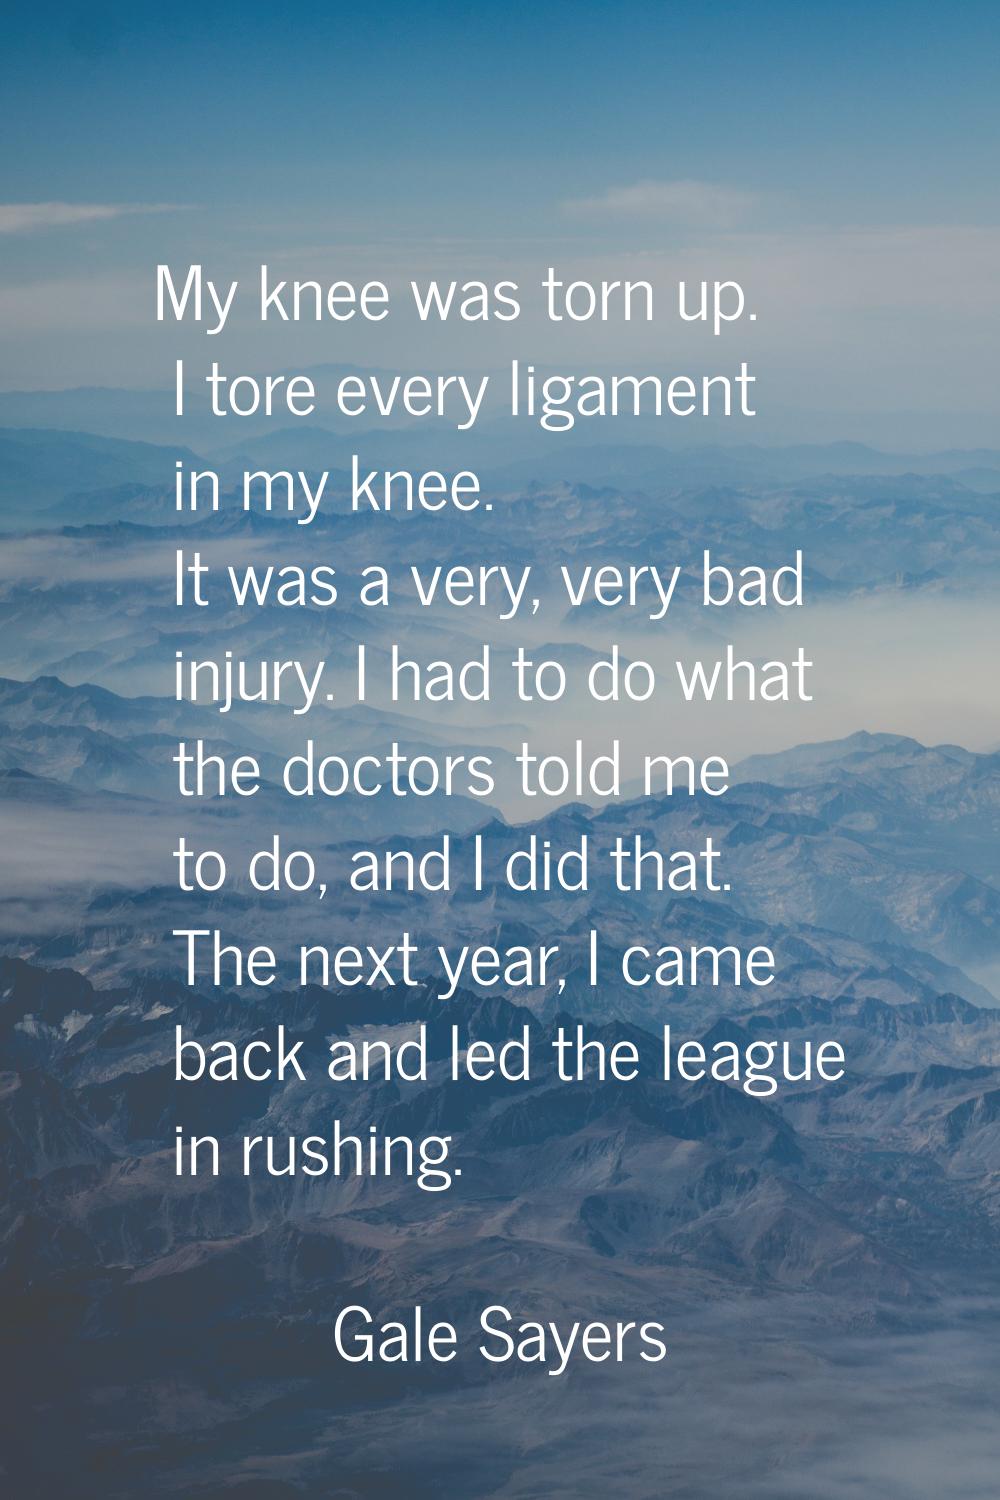 My knee was torn up. I tore every ligament in my knee. It was a very, very bad injury. I had to do 